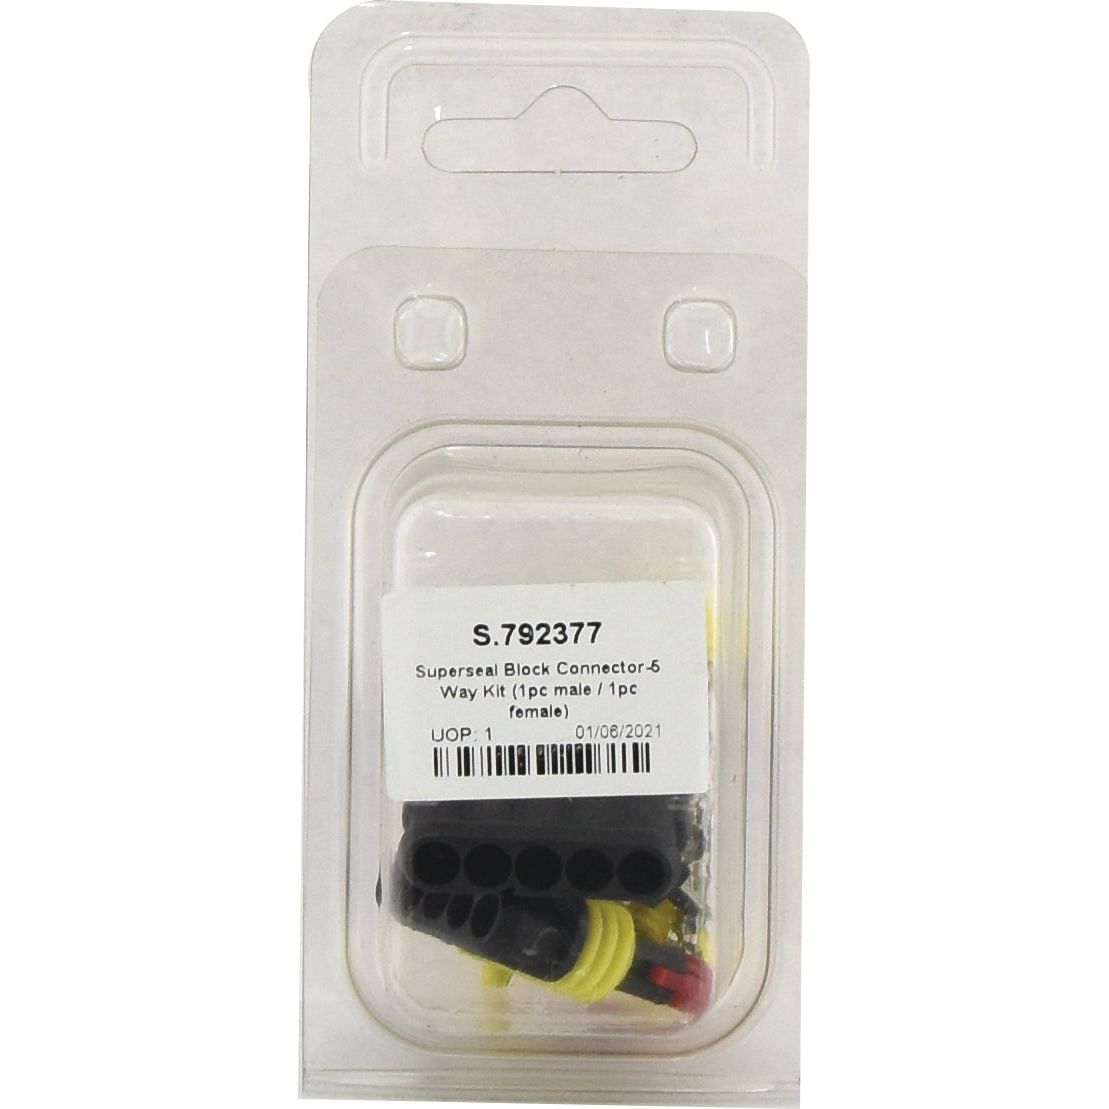 Superseal Block Connector-5 Way Kit (1pc male / 1pc female) Agripak
 - S.792377 - Massey Tractor Parts